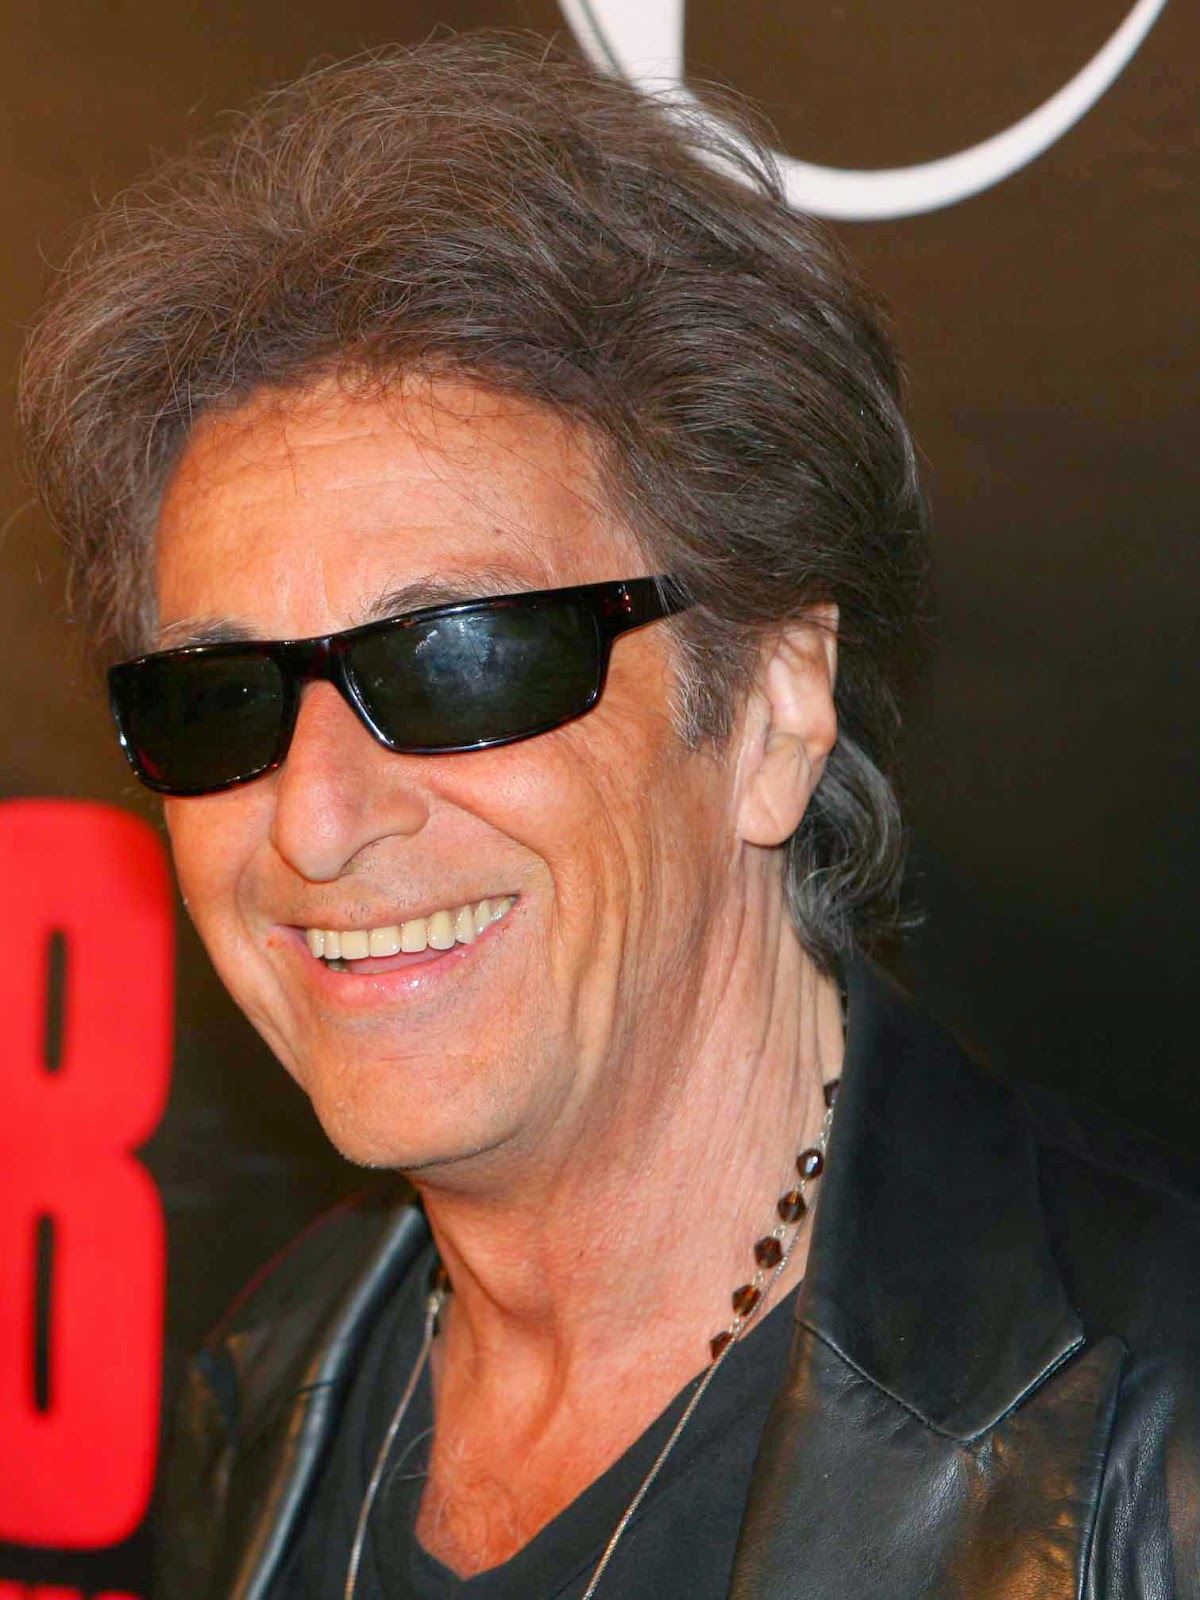 AL PACINO PLAYS ATLANTIC CITY FOR ONE NIGHT ONLY